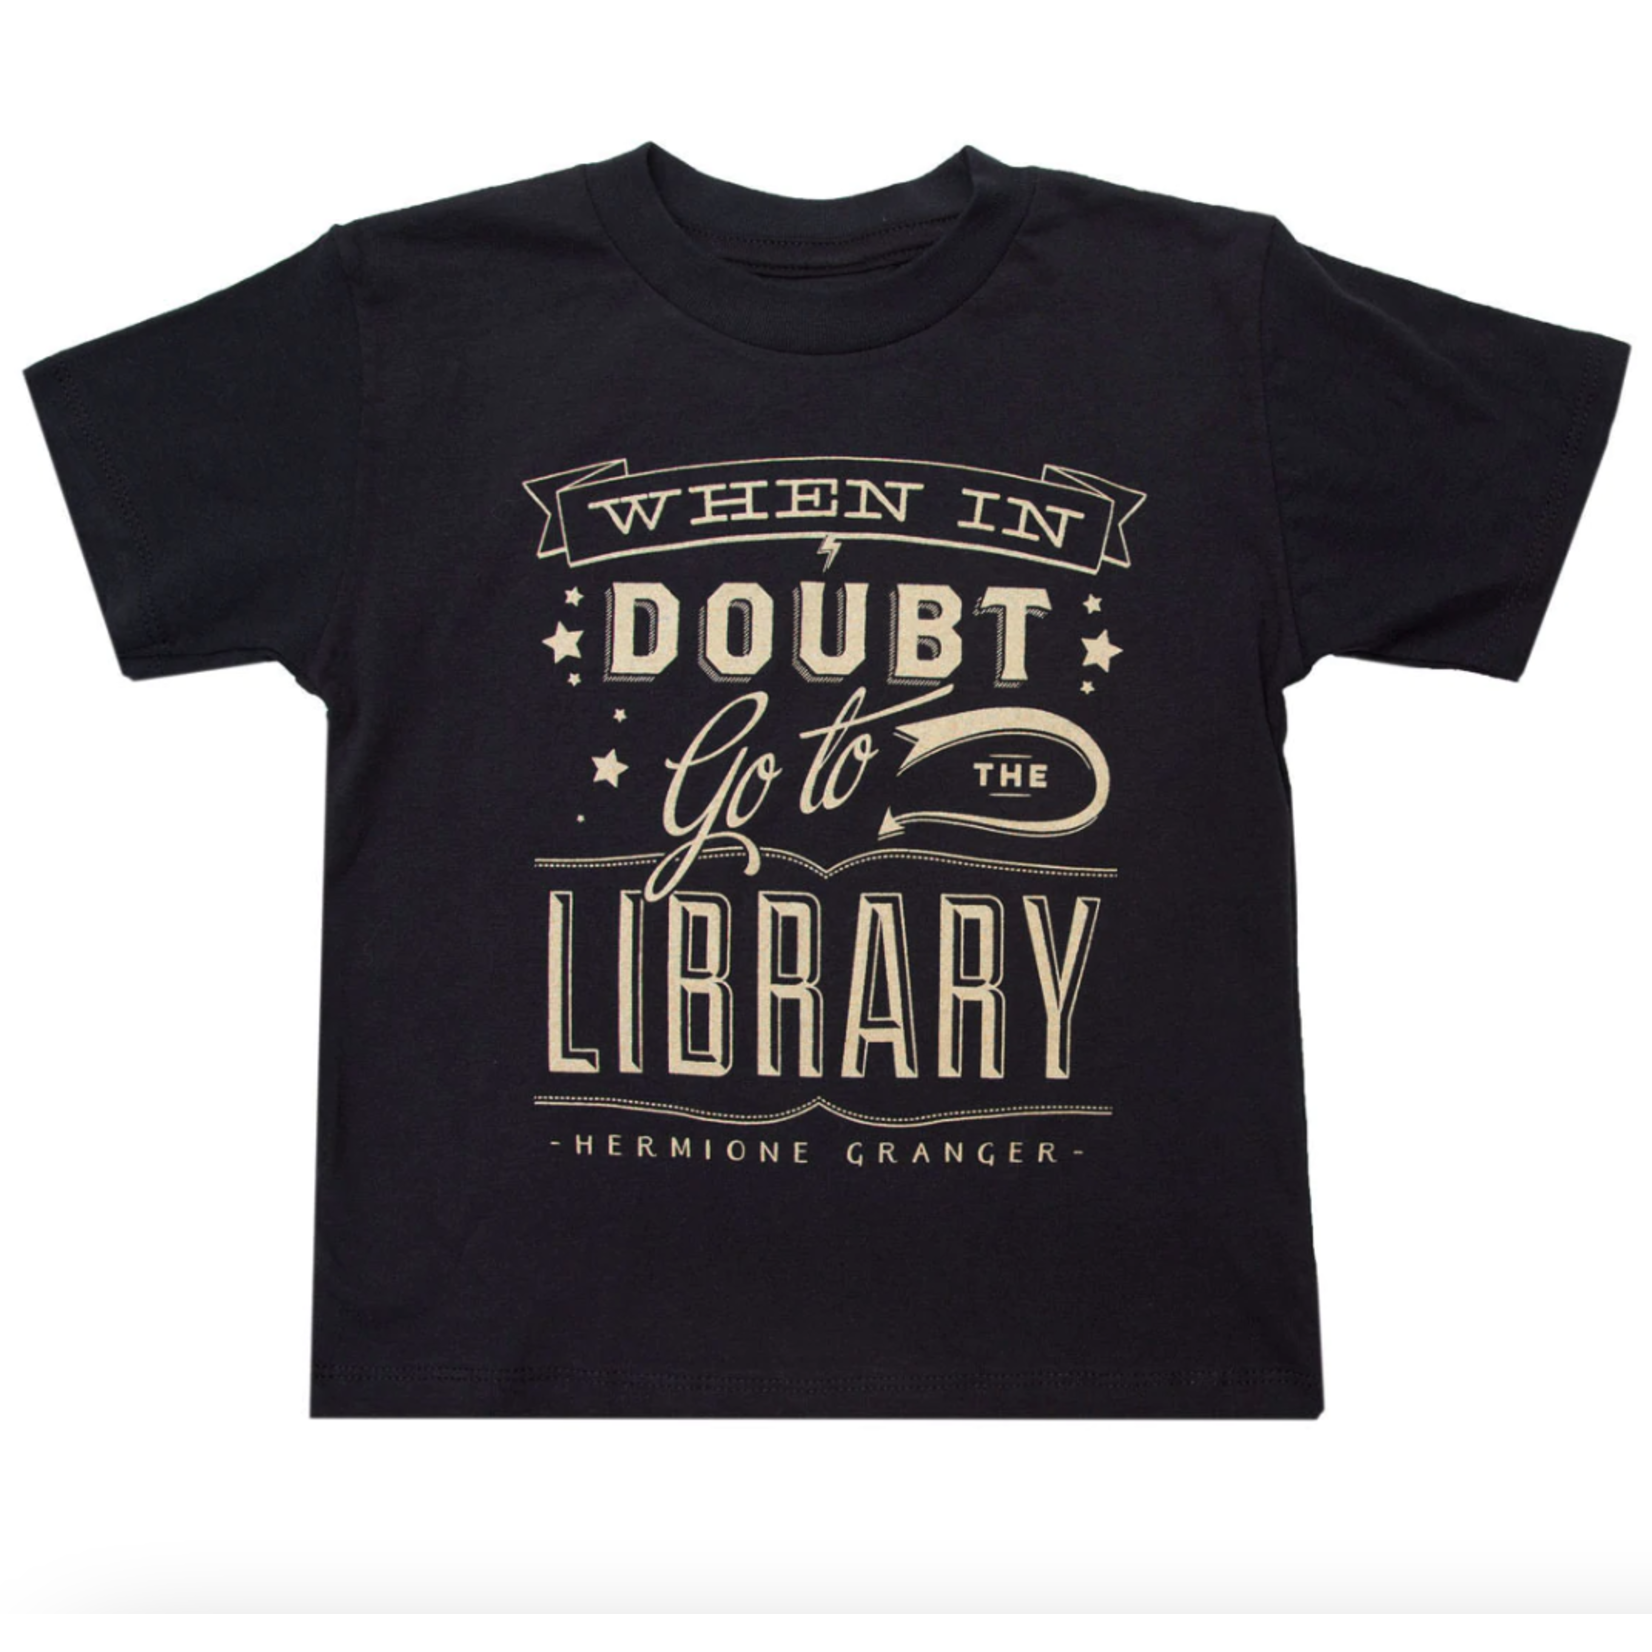 Out of Print when in doubt tee